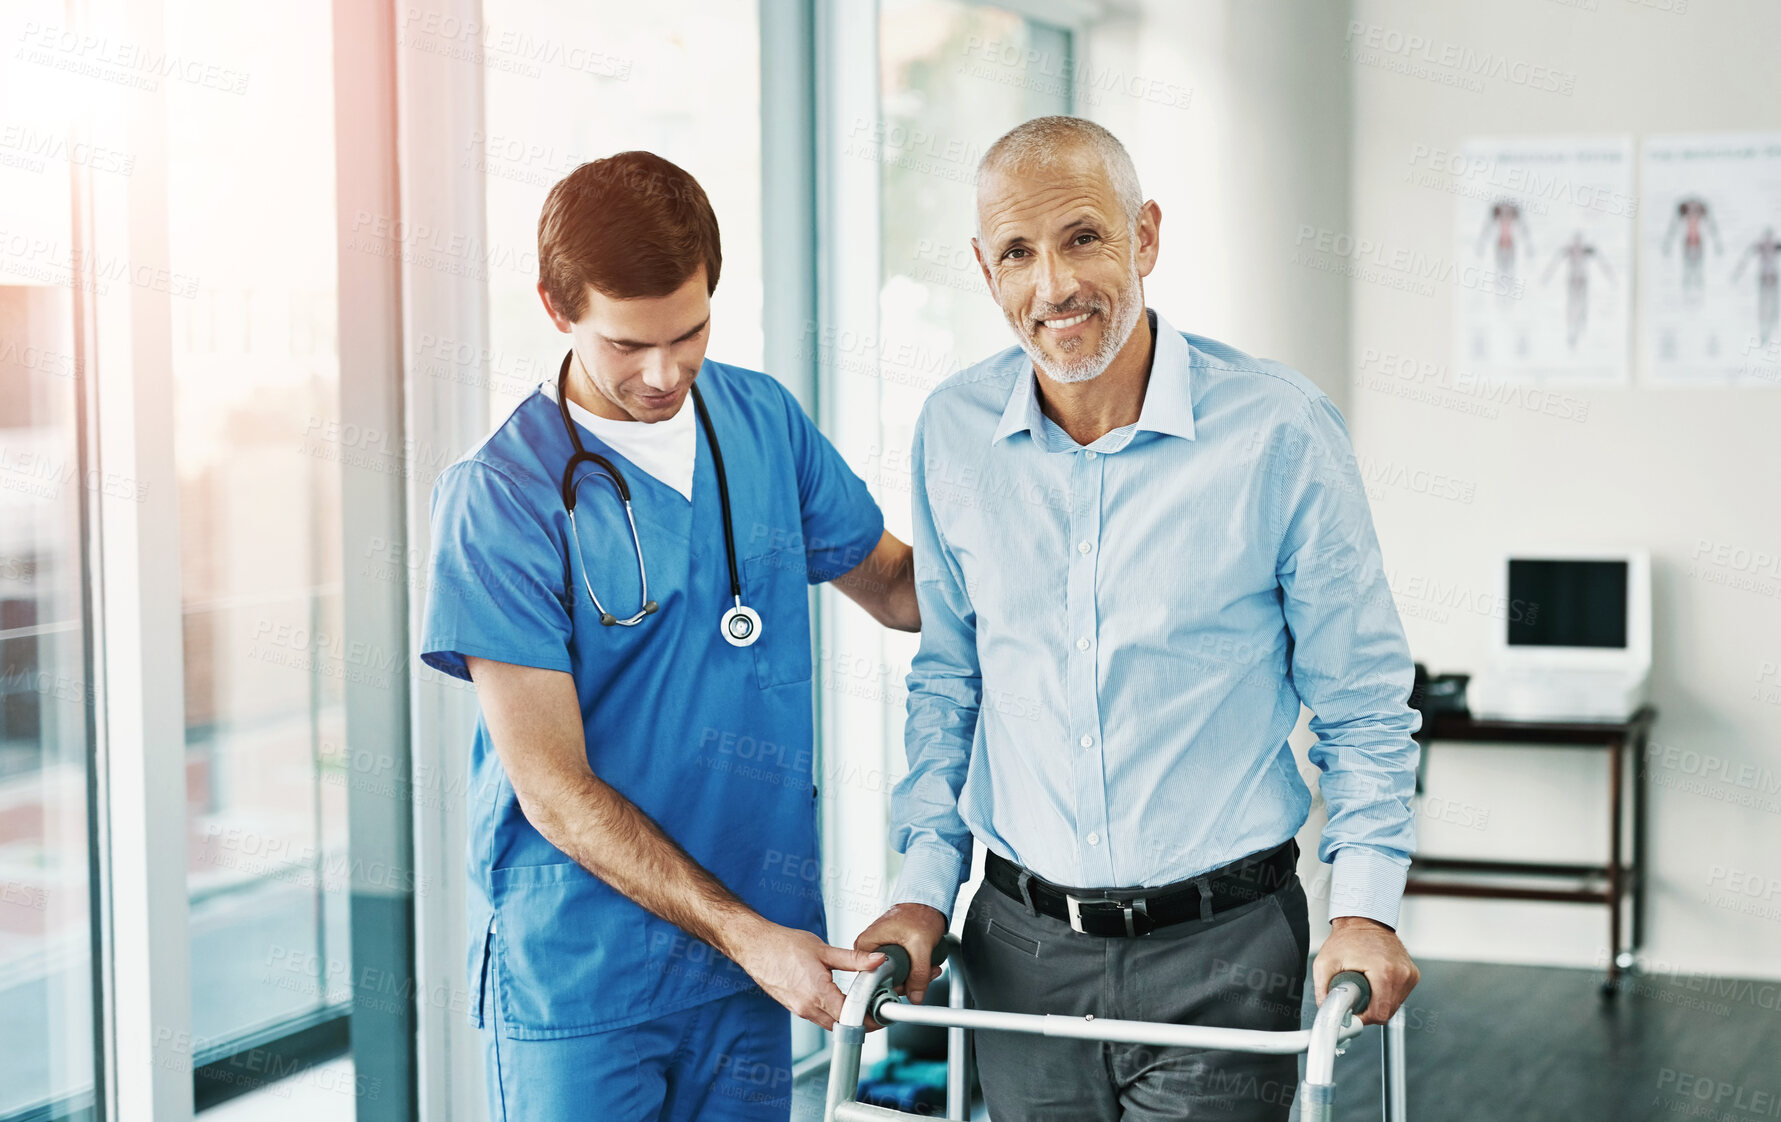 Buy stock photo Nurse, portrait and man with walker for support, patient rehabilitation and balance training for recovery process. Healthcare, caregiver and physiotherapy for mobility, walking and physical therapy.